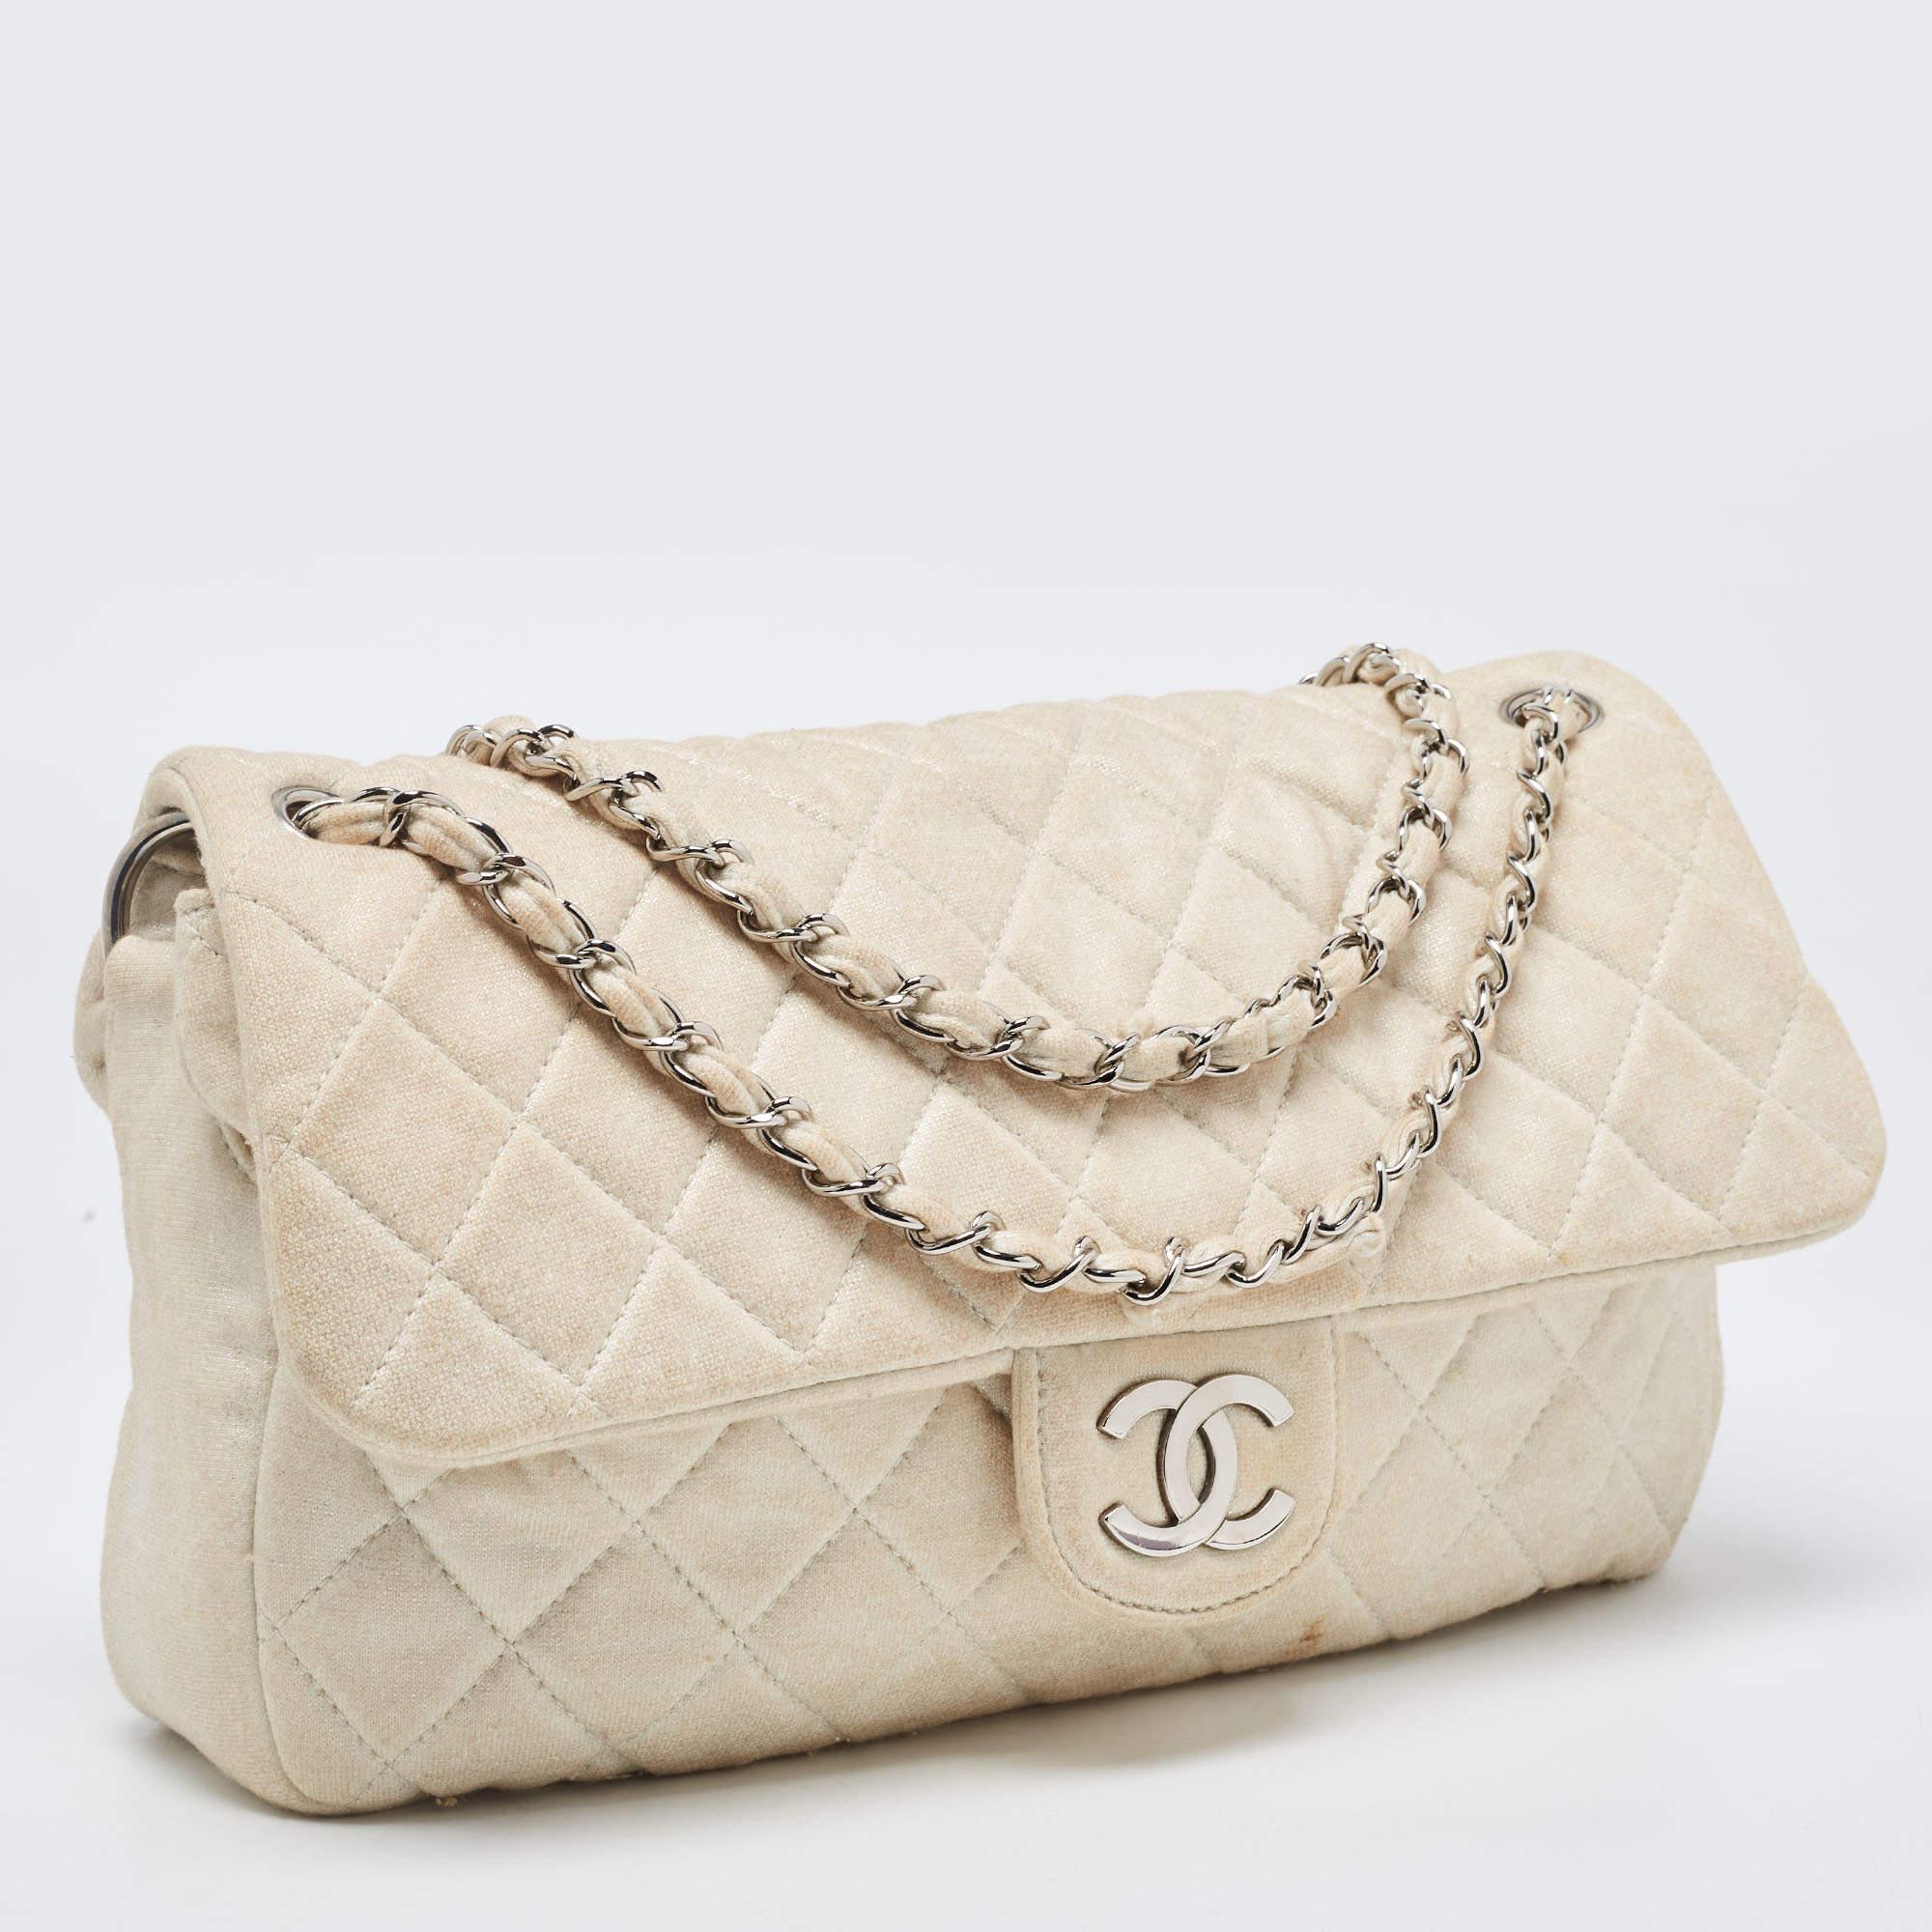 Chanel White/Gold Quilted Jersey CC Flap Bag In Fair Condition For Sale In Dubai, Al Qouz 2